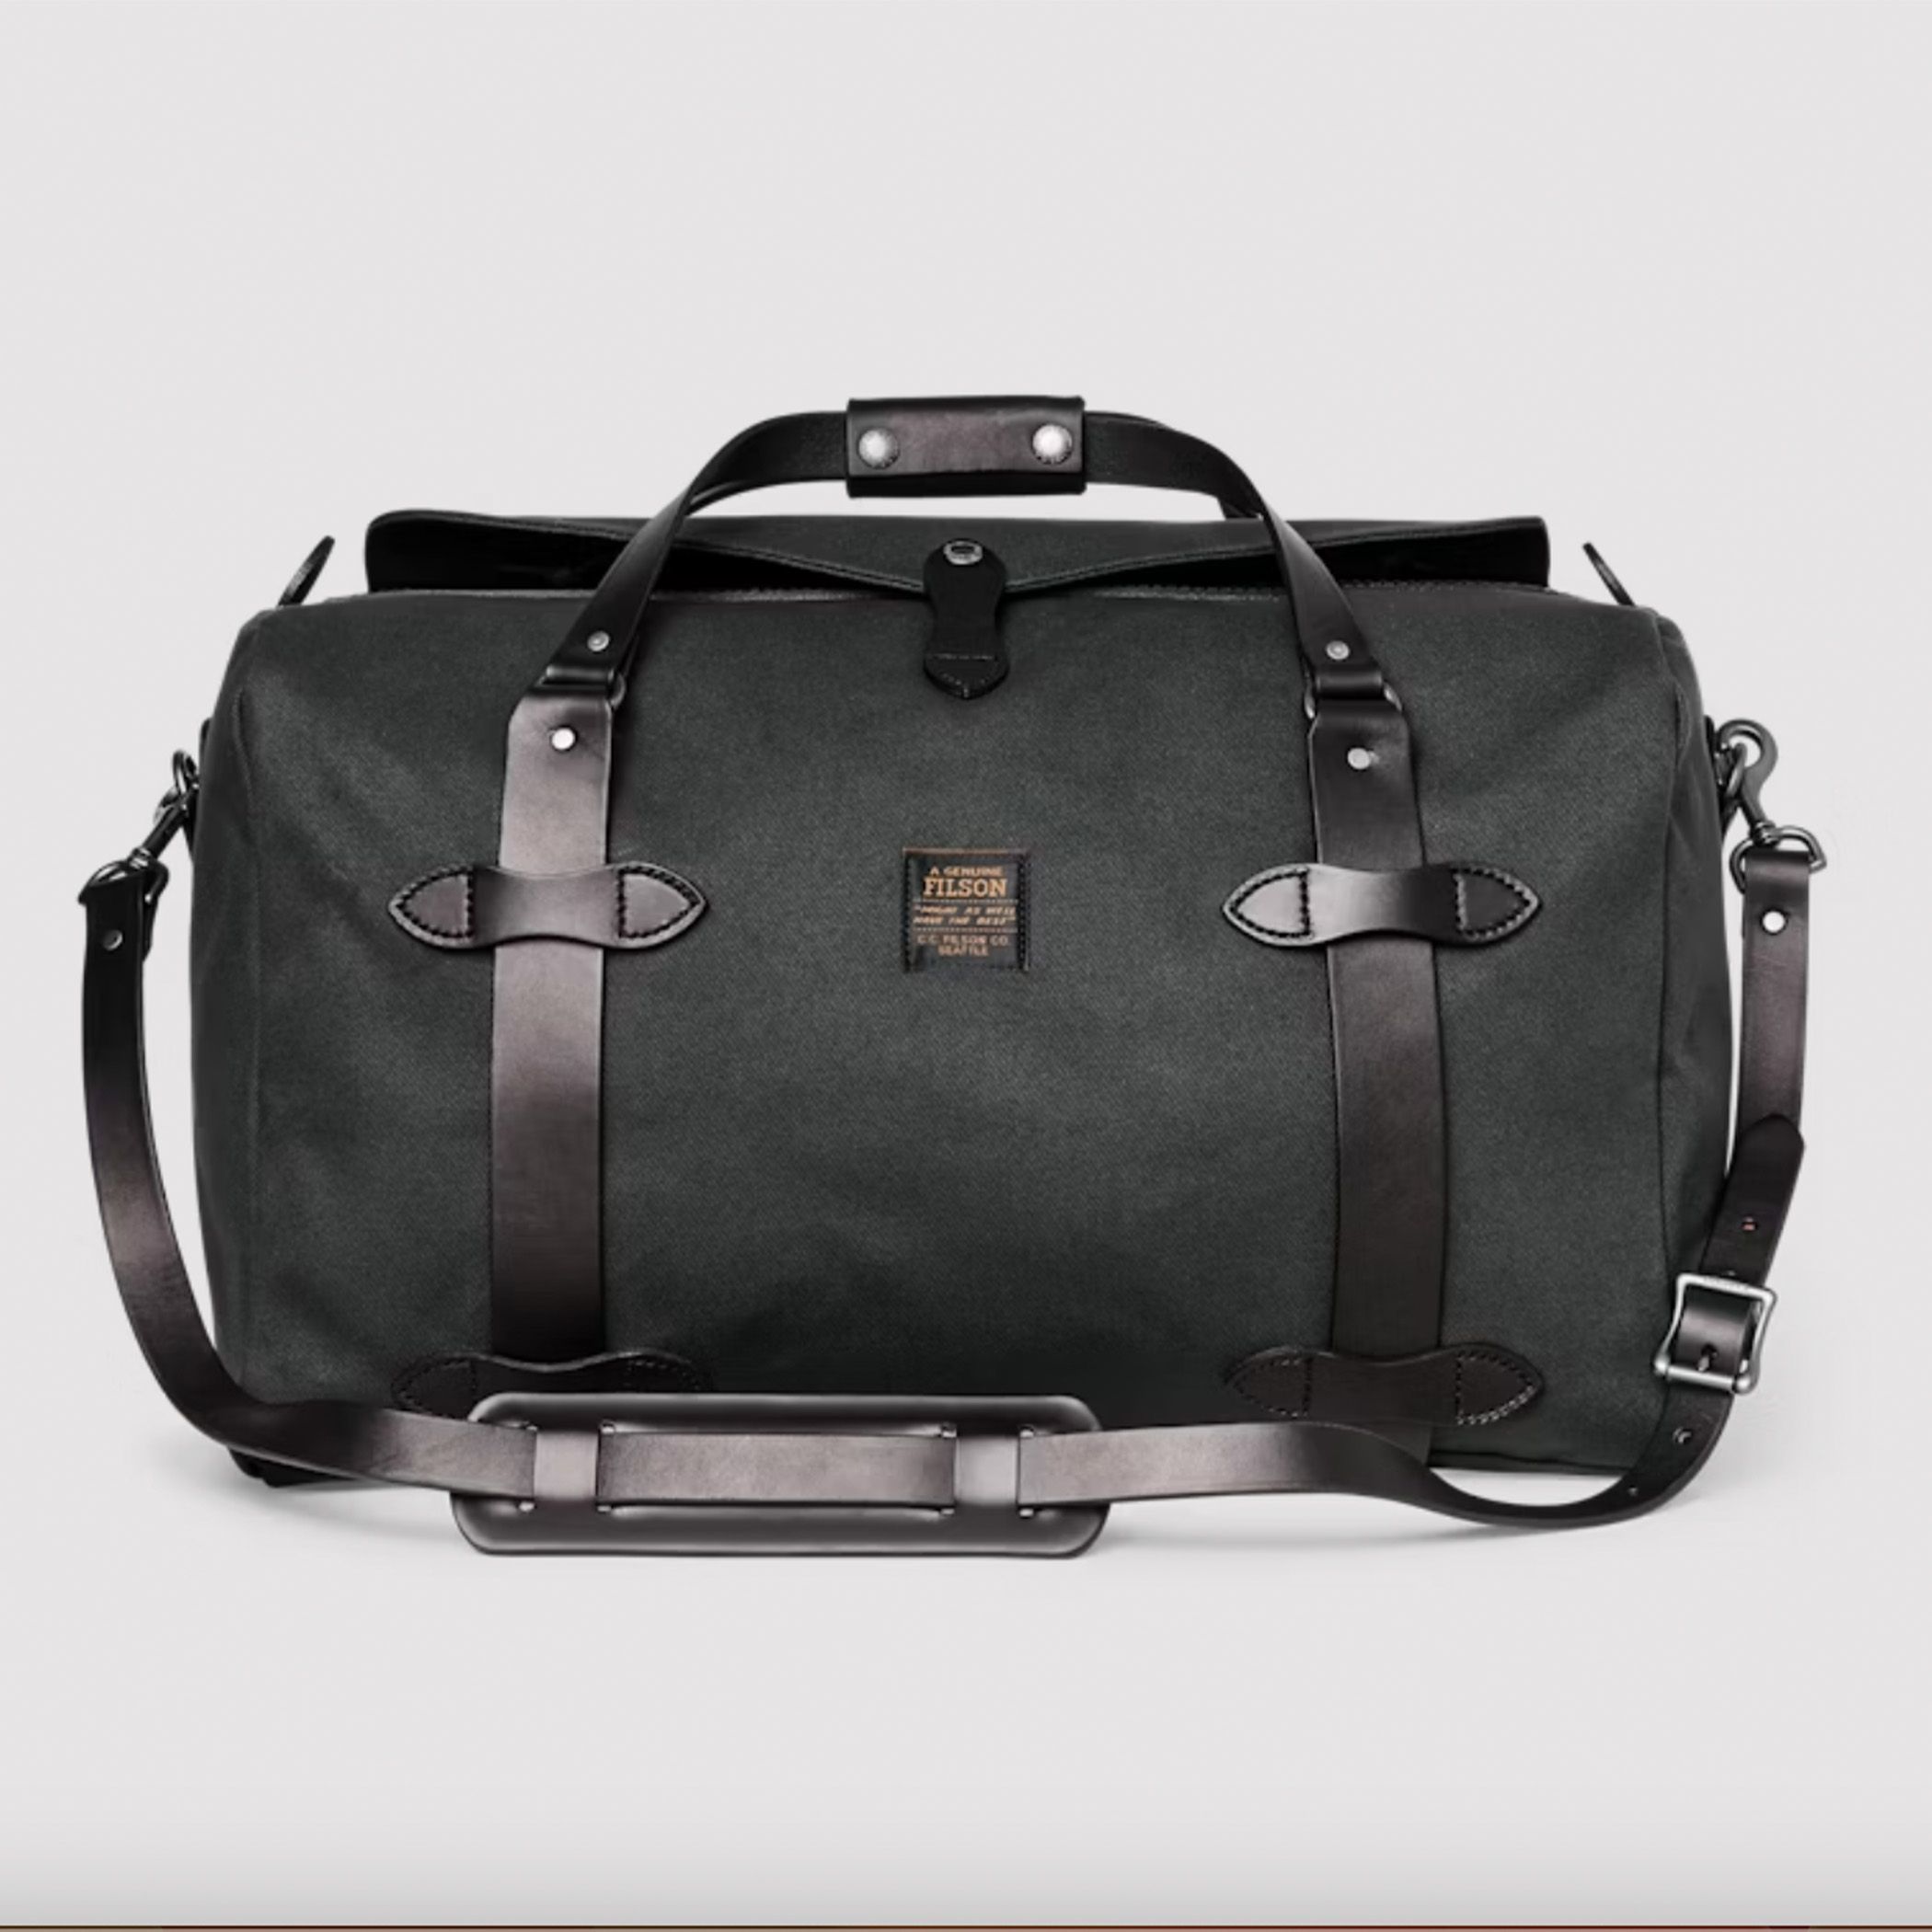 <p><strong>$575.00</strong></p><p>Seattle's Filson began as an outfitter for the pioneers of the 1897 Yukon Gold Rush. Today, Filson apparel and gear represent the ultimate in quality to outdoor enthusiasts and tradespeople the world over, combining durability and style in a rugged aesthetic derived from function. Looks good and works great? Sign us up.</p><p>The <strong>Medium Rugged Twill Duffel</strong> is perhaps Filson's best-known piece of luggage. The lightly waxed fabric keeps your gear dry, and bridle leather from <a href="https://wickett-craig.com/">Wickett & Craig</a> is used not just for the removable shoulder strap but also for Filson's signature leather wraparound handles, designed to cradle heavy loads. The bag closes with a solid brass YKK zipper that's protected by a snap storm flap. Solid brass hardware is used throughout, and interior end pockets provide organization. It's perfect for throwing into the back seat for a weekend road trip; it even makes an ideal carry-on. </p><a class="body-btn-link" href="https://www.amazon.com/filson/s?k=filson&tag=syndication-20&ascsubtag=%5Bartid%7C10064.g.44130437%5Bsrc%7Cmsn-us">shop filson at amazon</a>